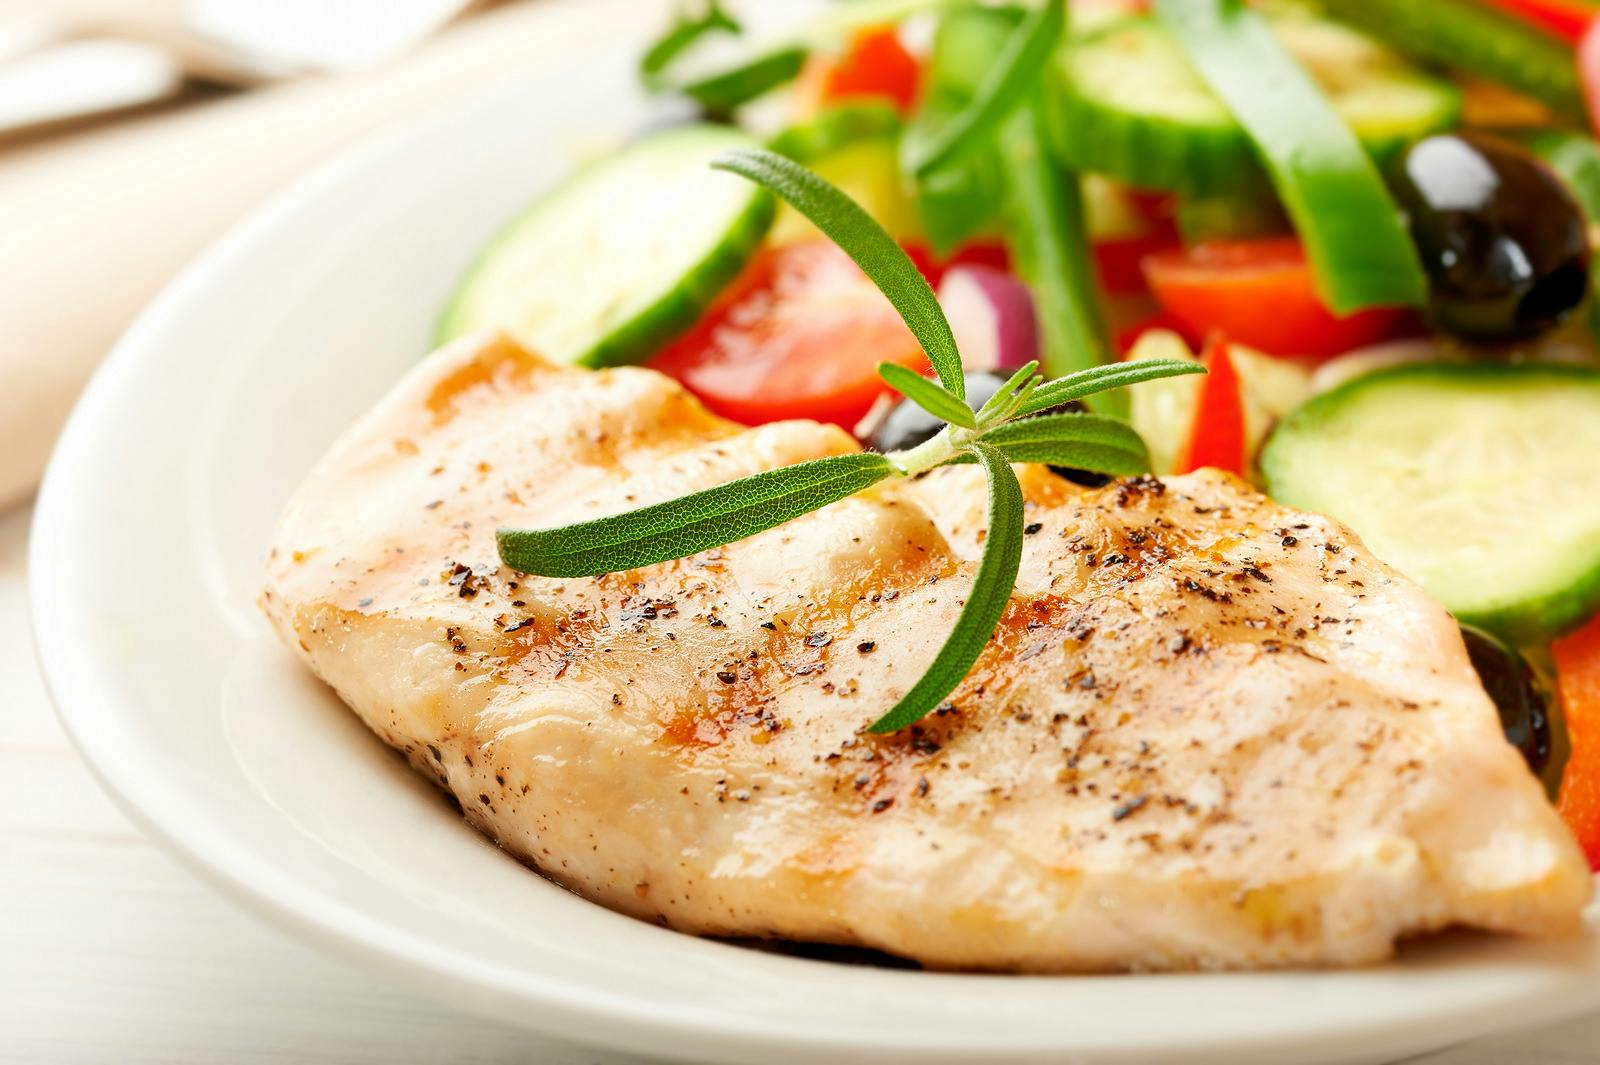 Grilled lean white meat chicken breast with green and red peppers.